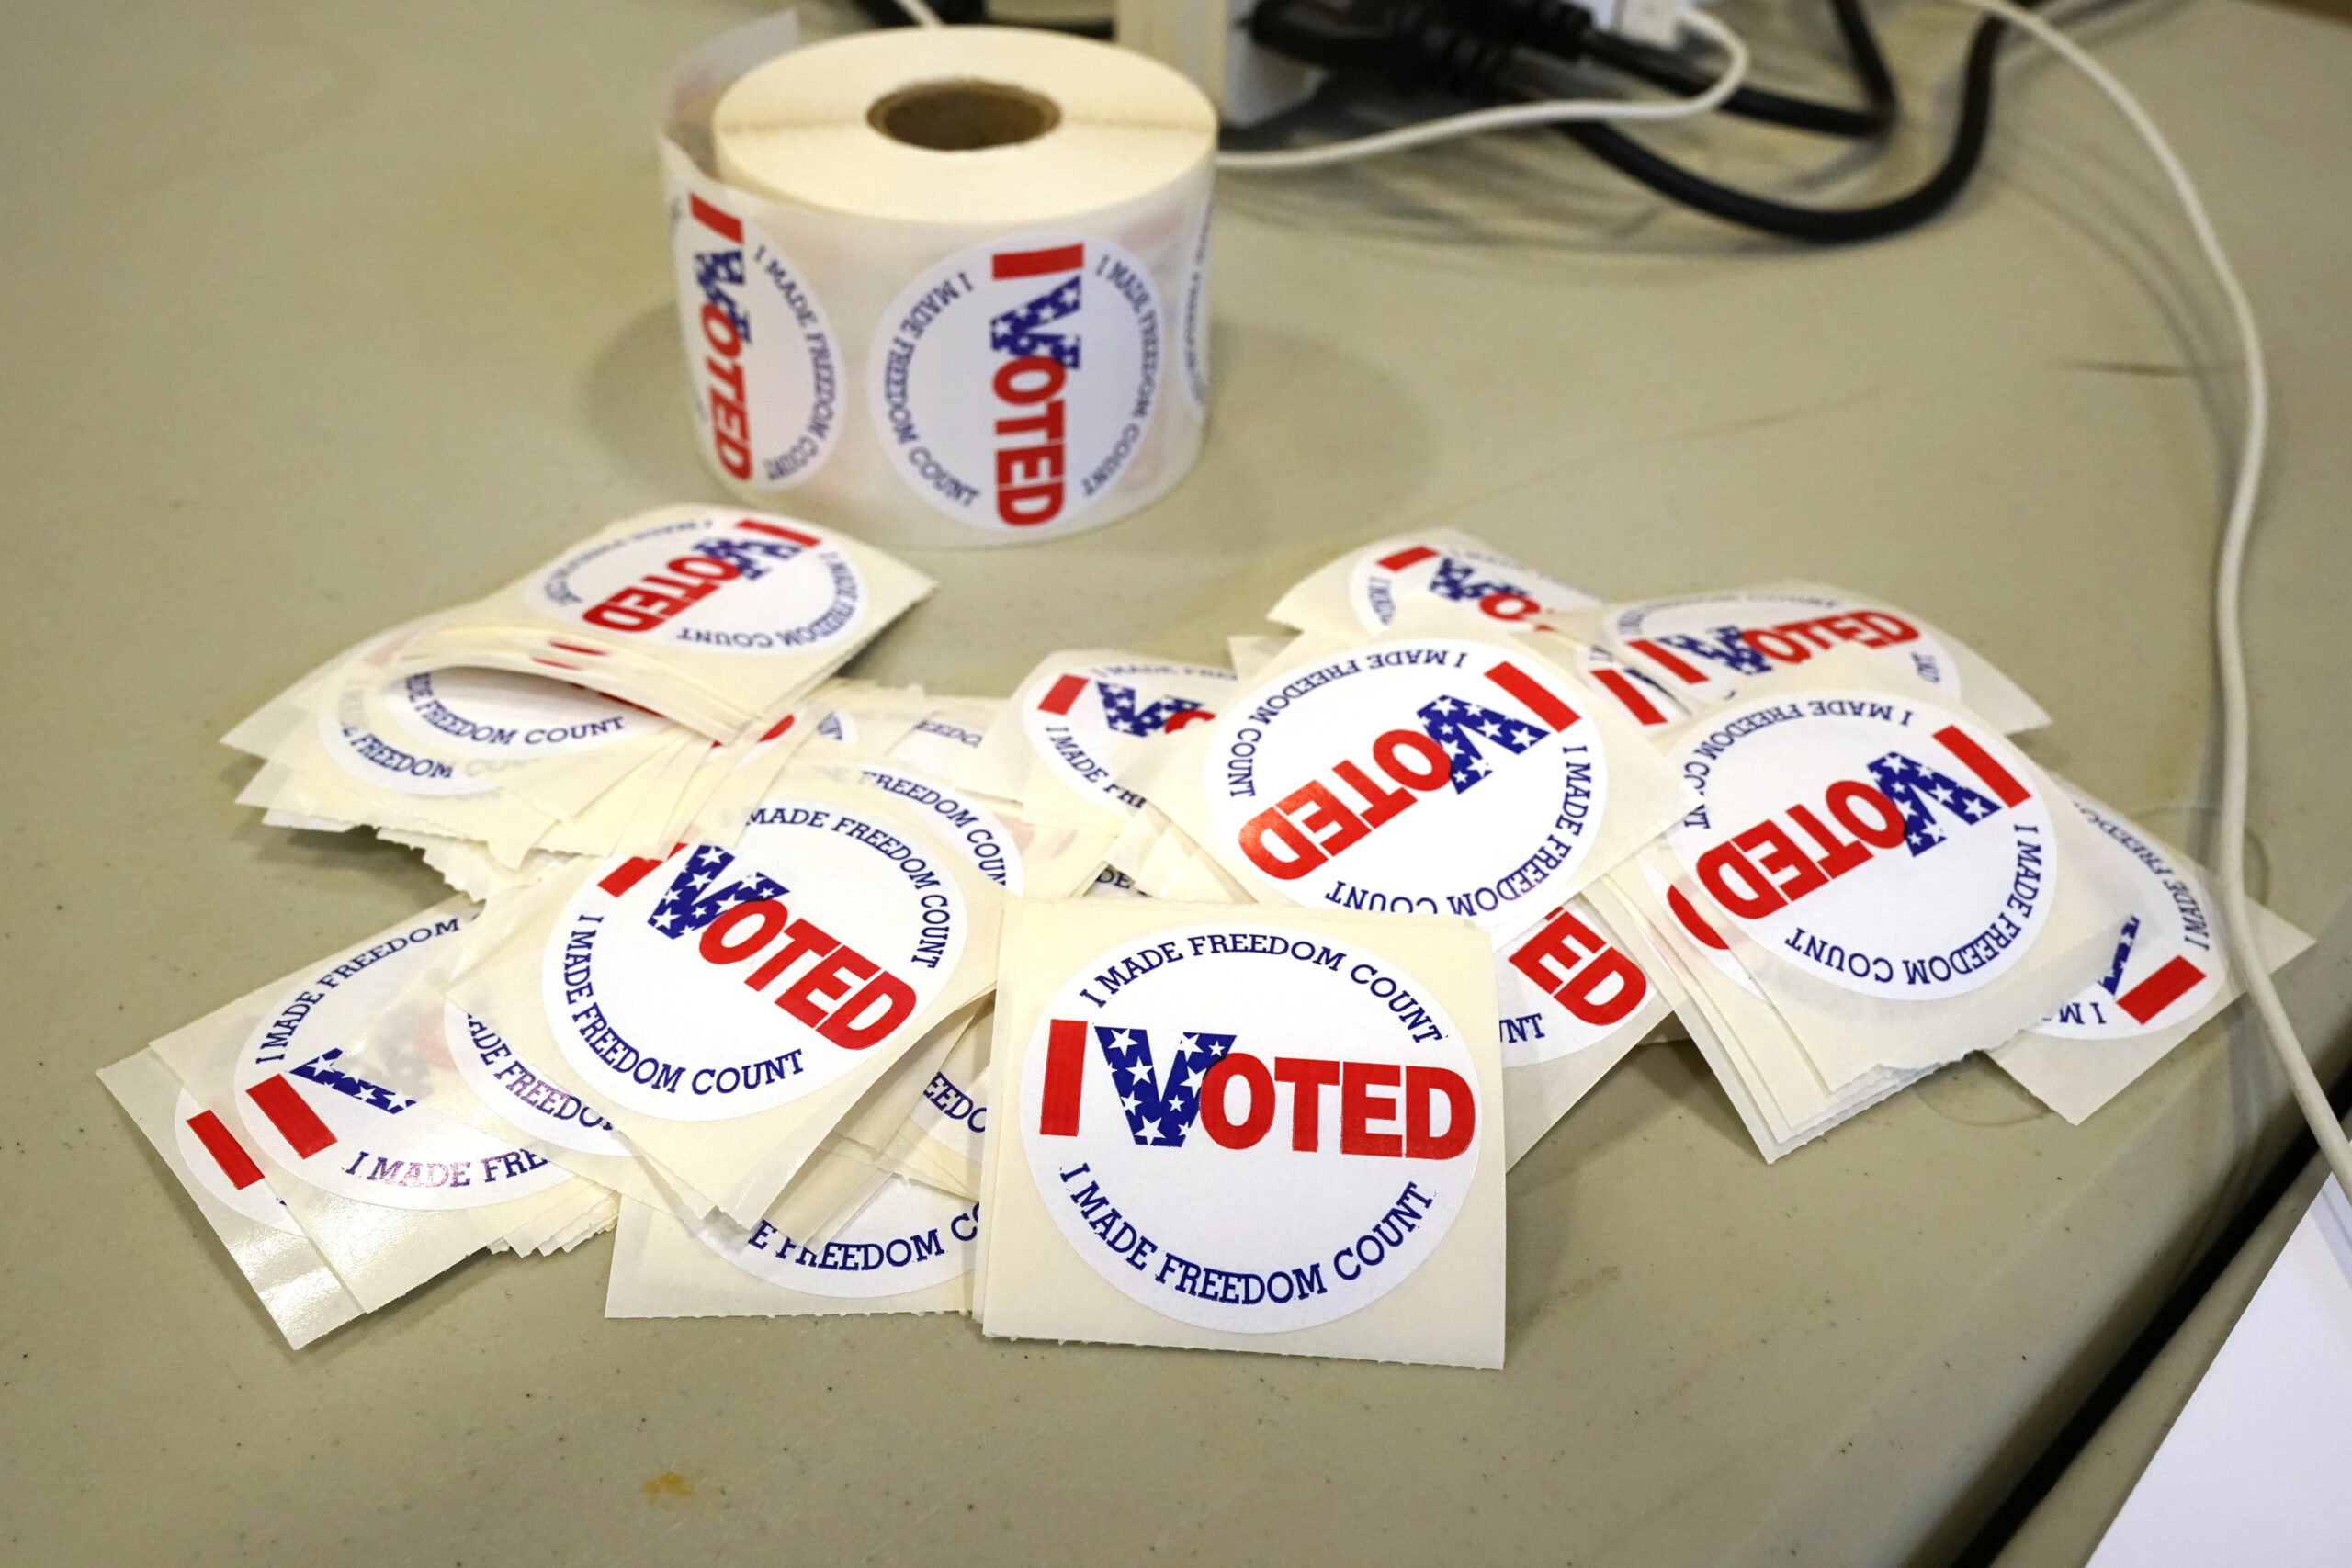 "I Voted" stickers are ready to be distributed to each person who filled out a ballot. (AP Photo/Ro...